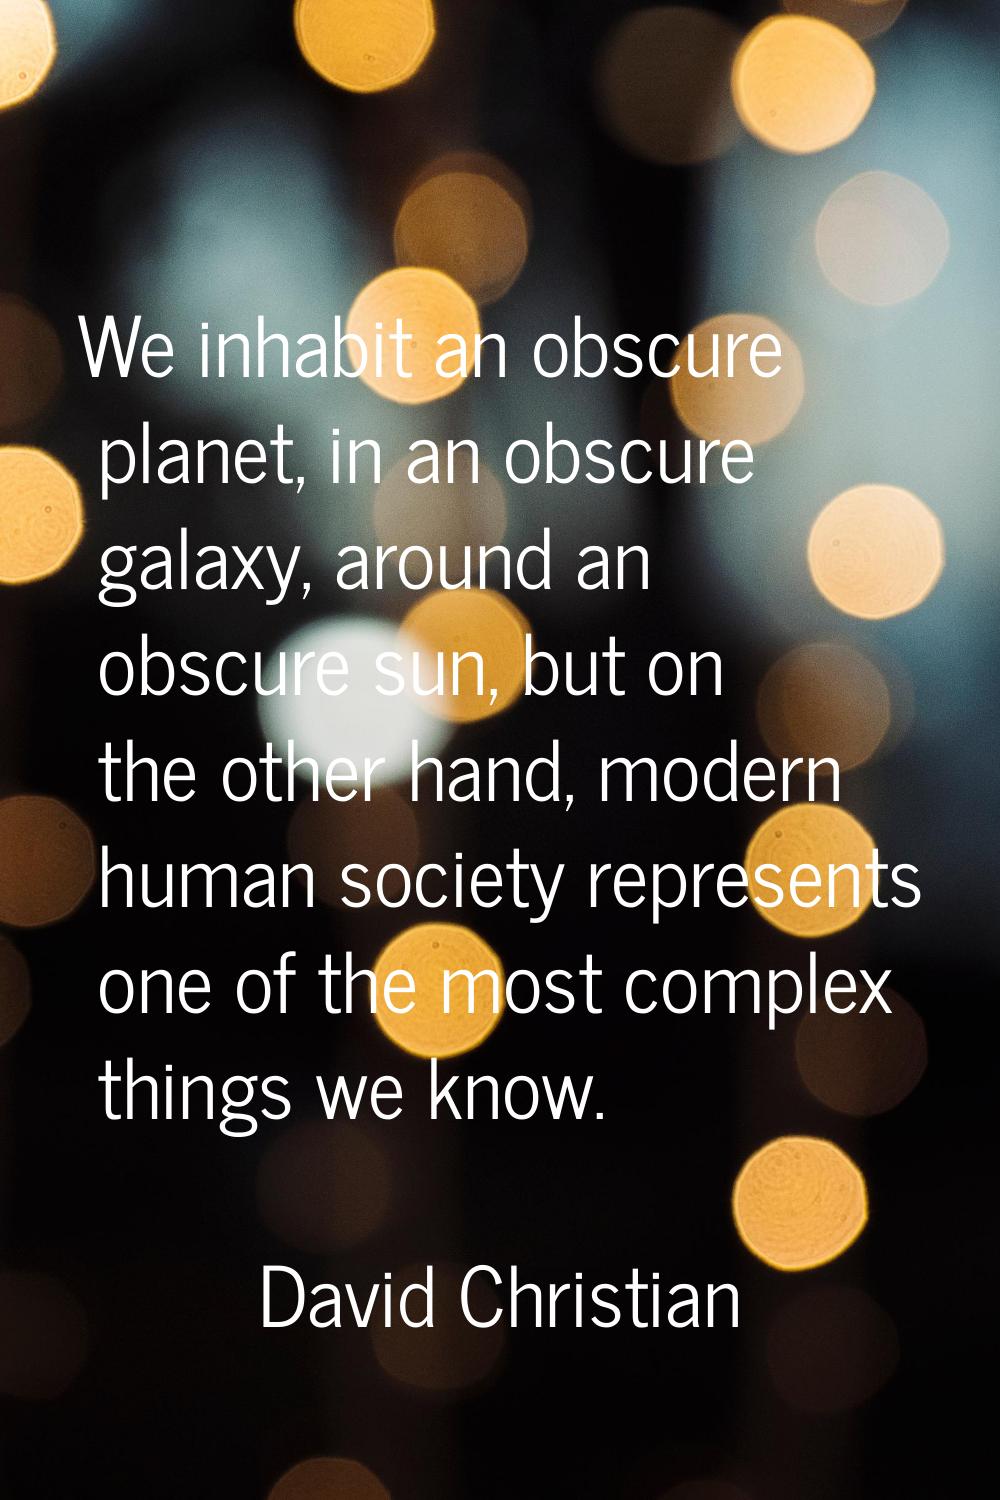 We inhabit an obscure planet, in an obscure galaxy, around an obscure sun, but on the other hand, m